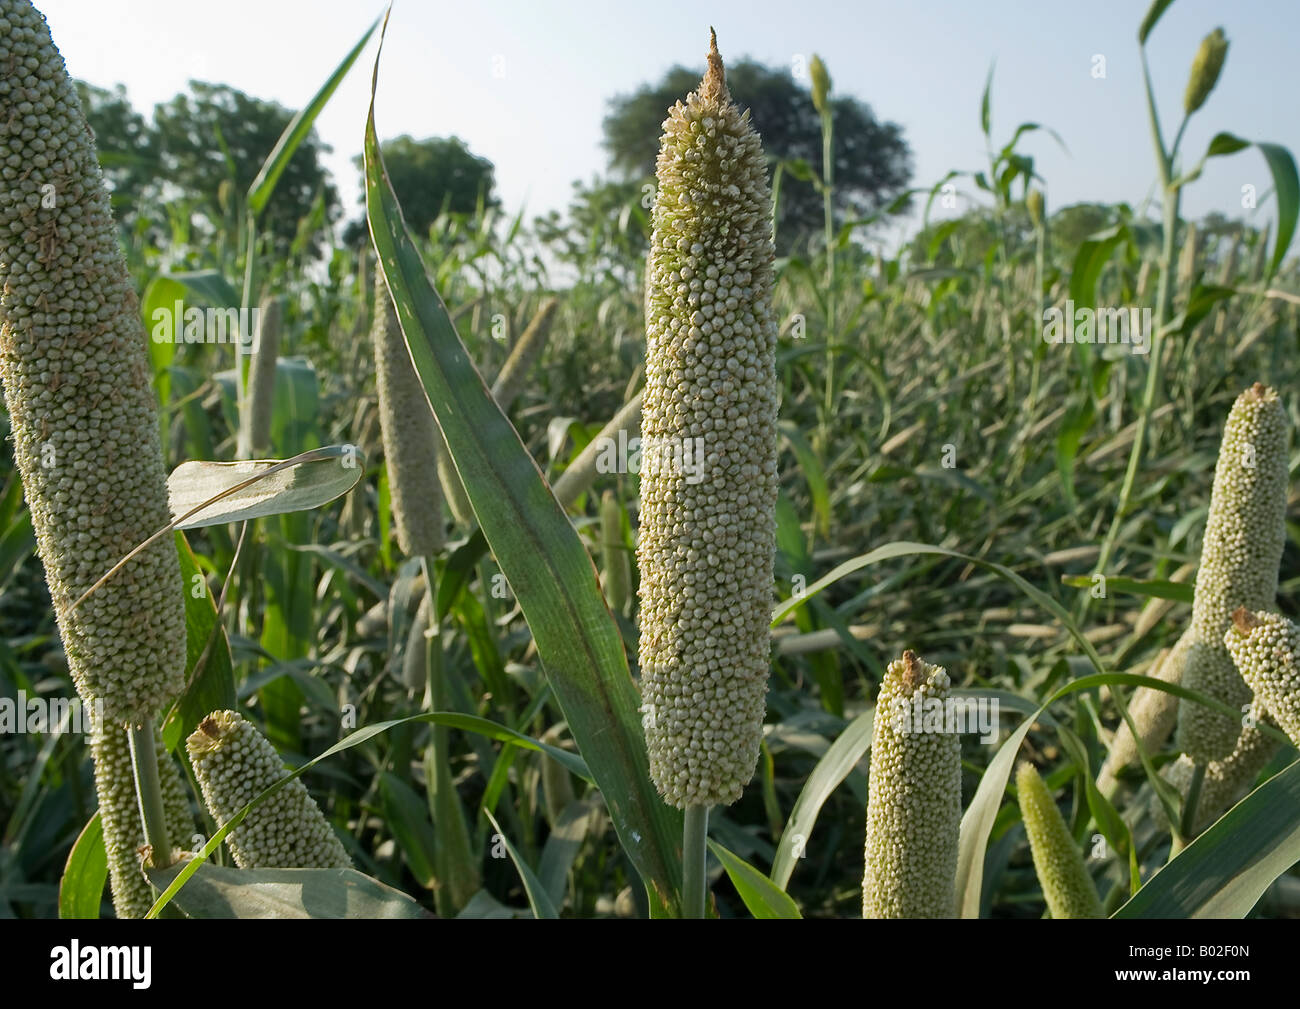 A close-up view of thick stalks of pearl millet plants in a big farm carrying big cob heads of clustered florets of small seeds. Stock Photo